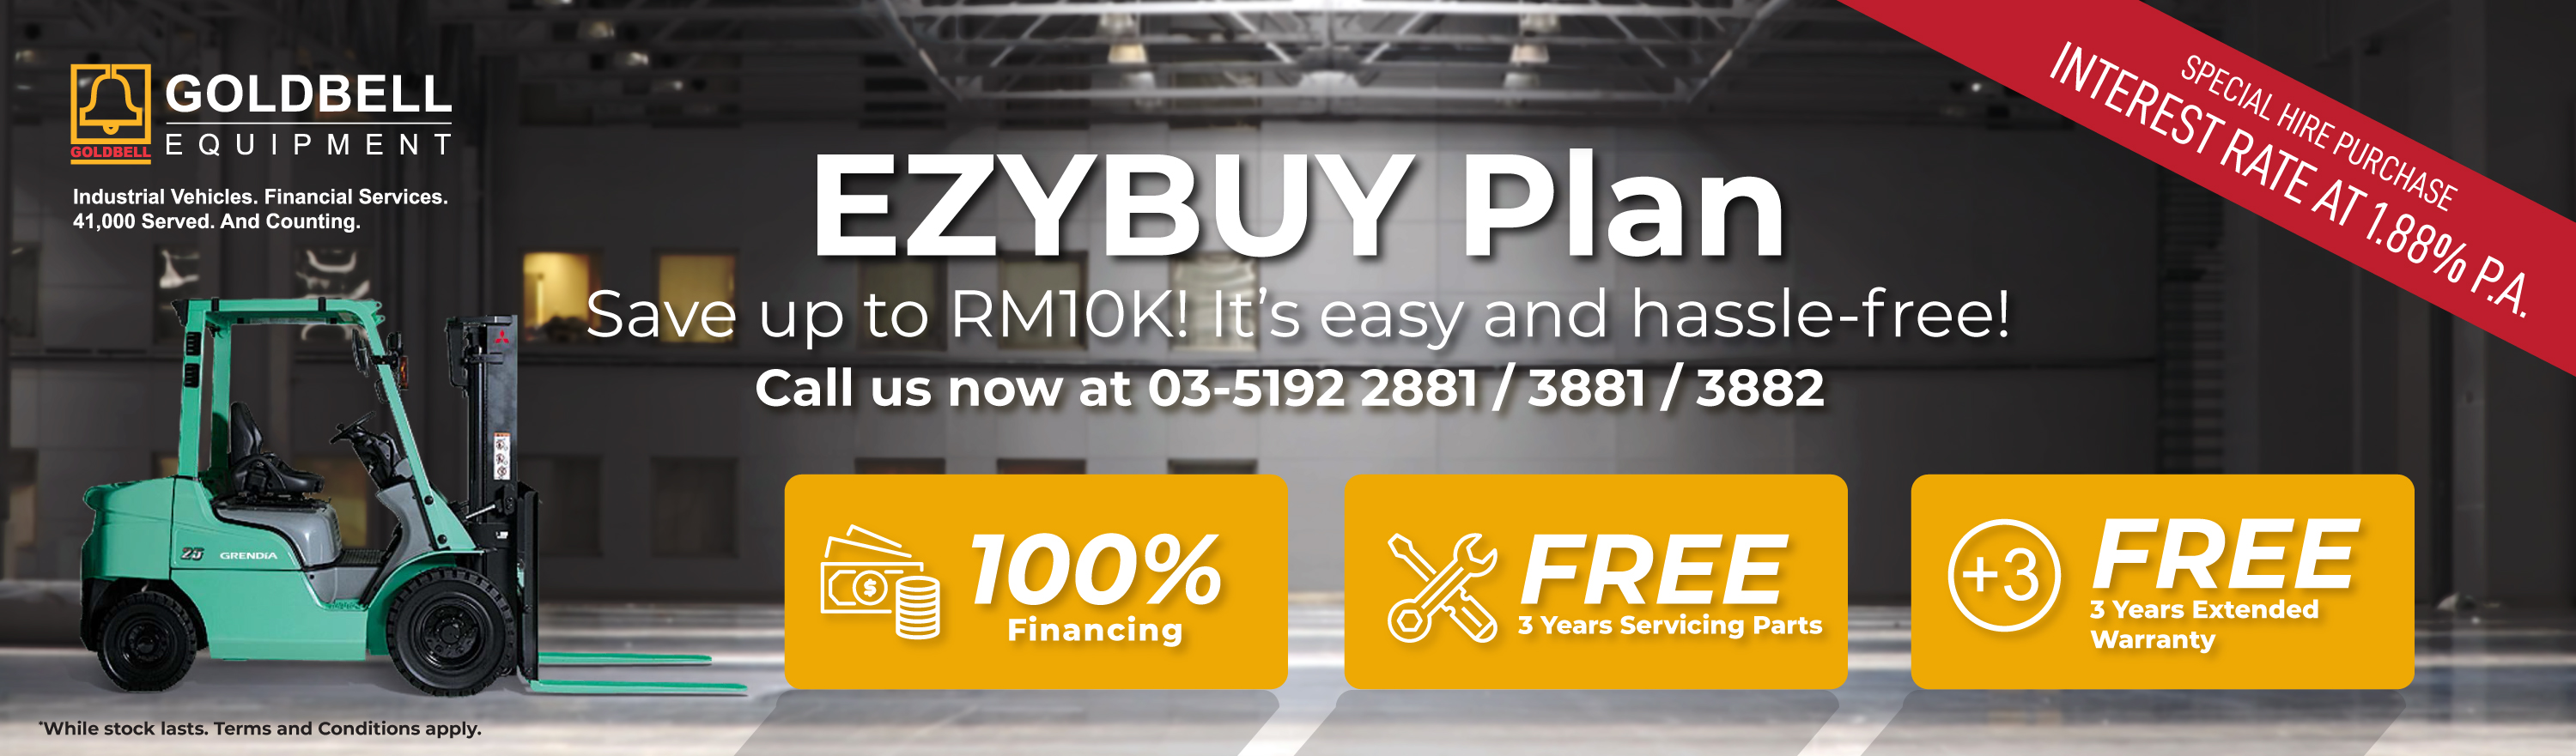 EZBUY PLAN: SAVE UP TO RM10K!